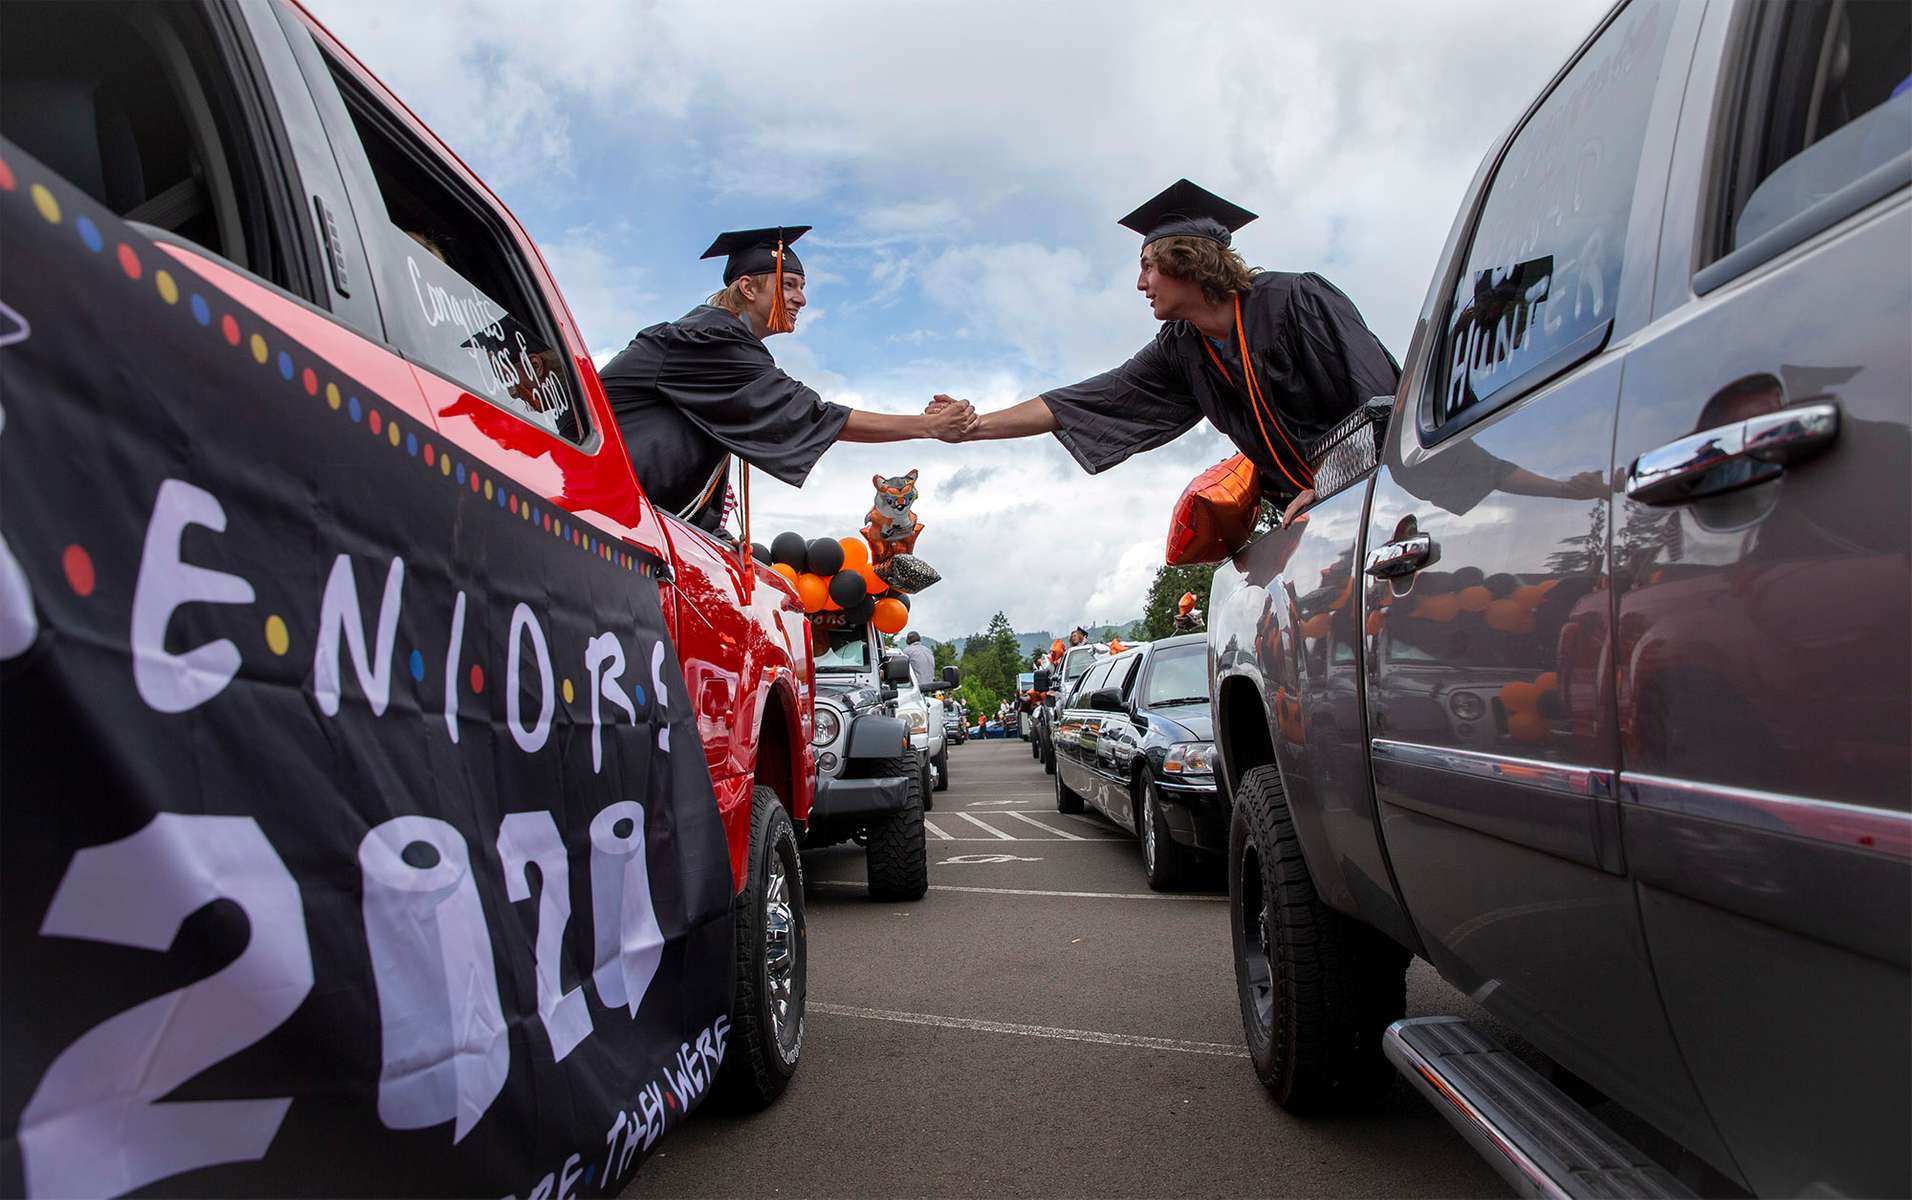 Mohawk High School seniors Dalton Martin and Hunter Carter shakes hands from the backs of their trucks as they stage in the parking lot to receive their diplomas as graduates of the Class of 2020. The traditional graduation at the school was cancelled due to Covid-19 so seniors had a drive-through celebration that went through Marcola. [Andy Nelson/The Register-Guard] - registerguard.com